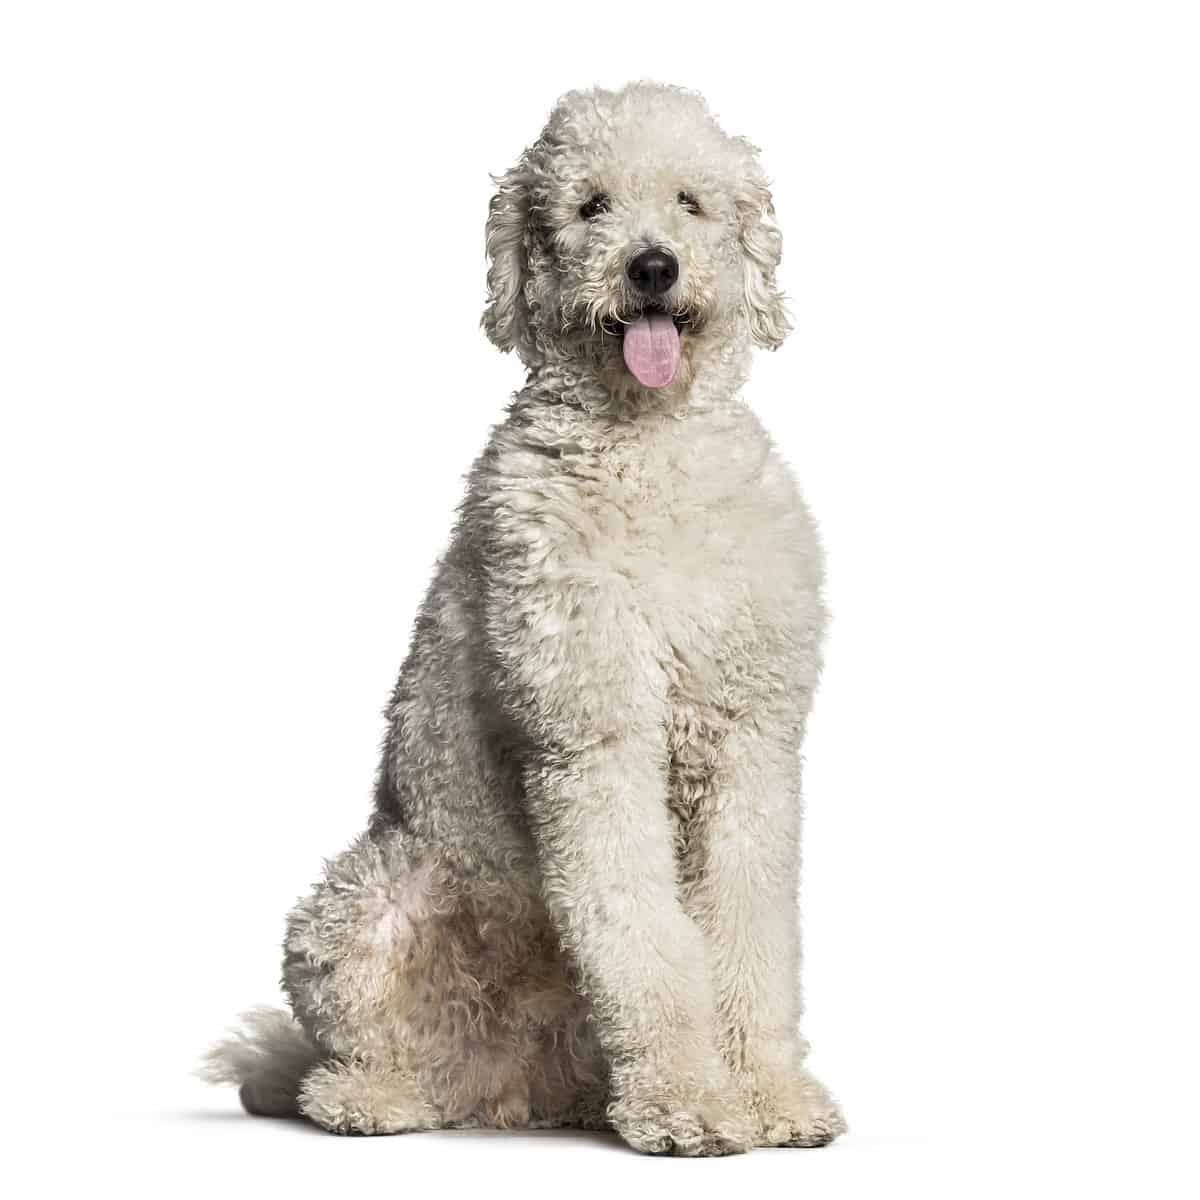 White Labradoodle, 1 year old, sitting in front of white background